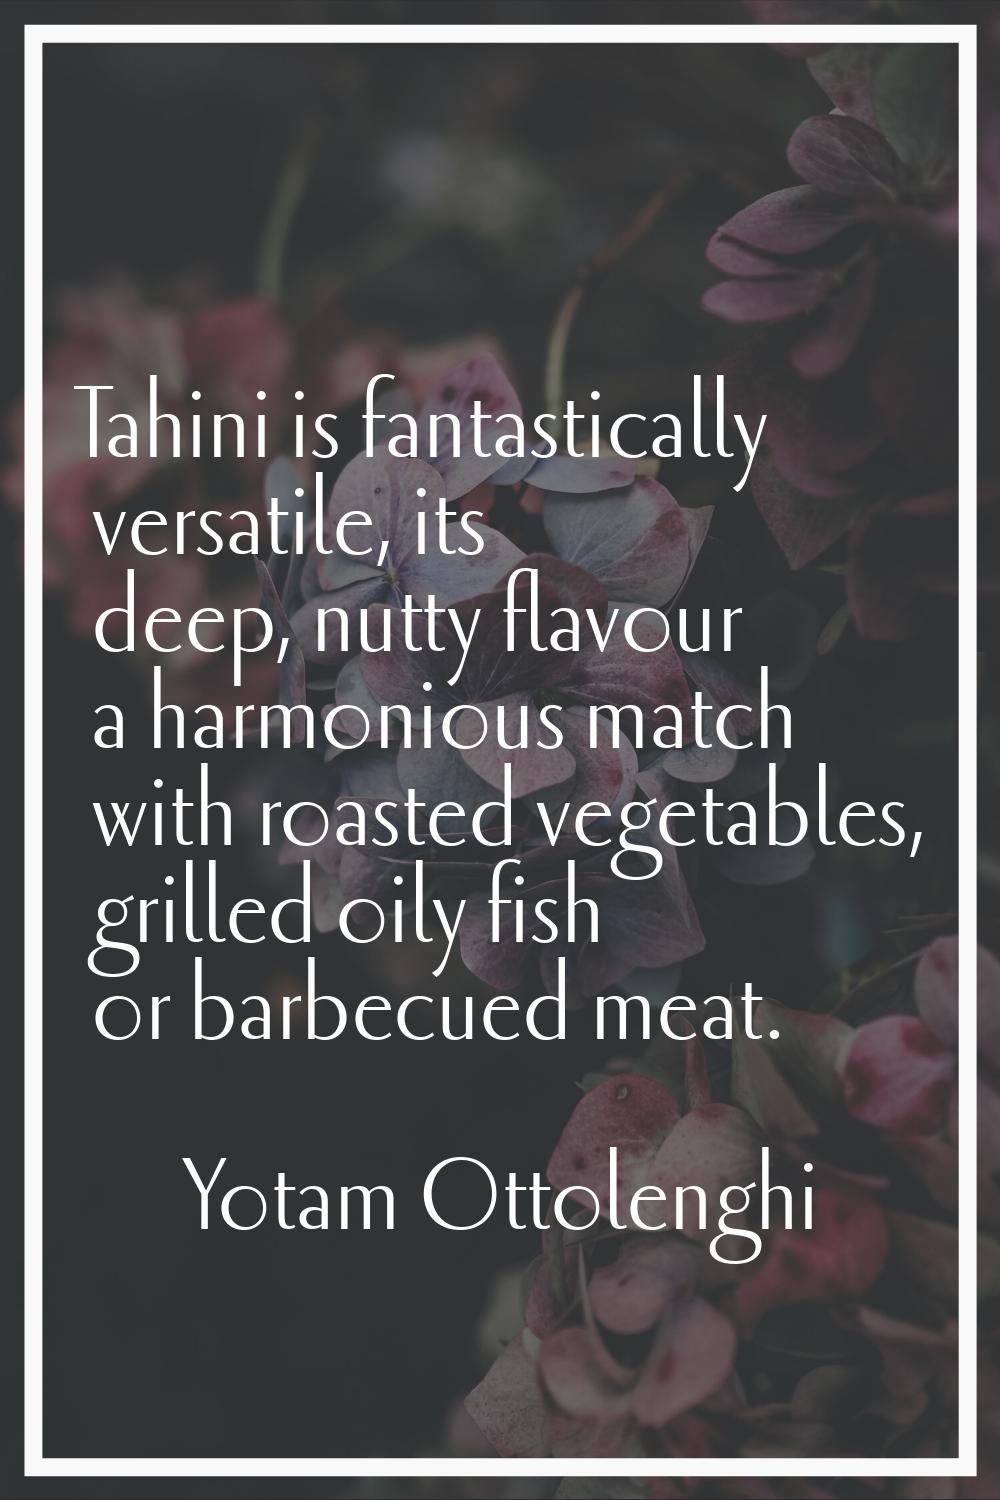 Tahini is fantastically versatile, its deep, nutty flavour a harmonious match with roasted vegetabl